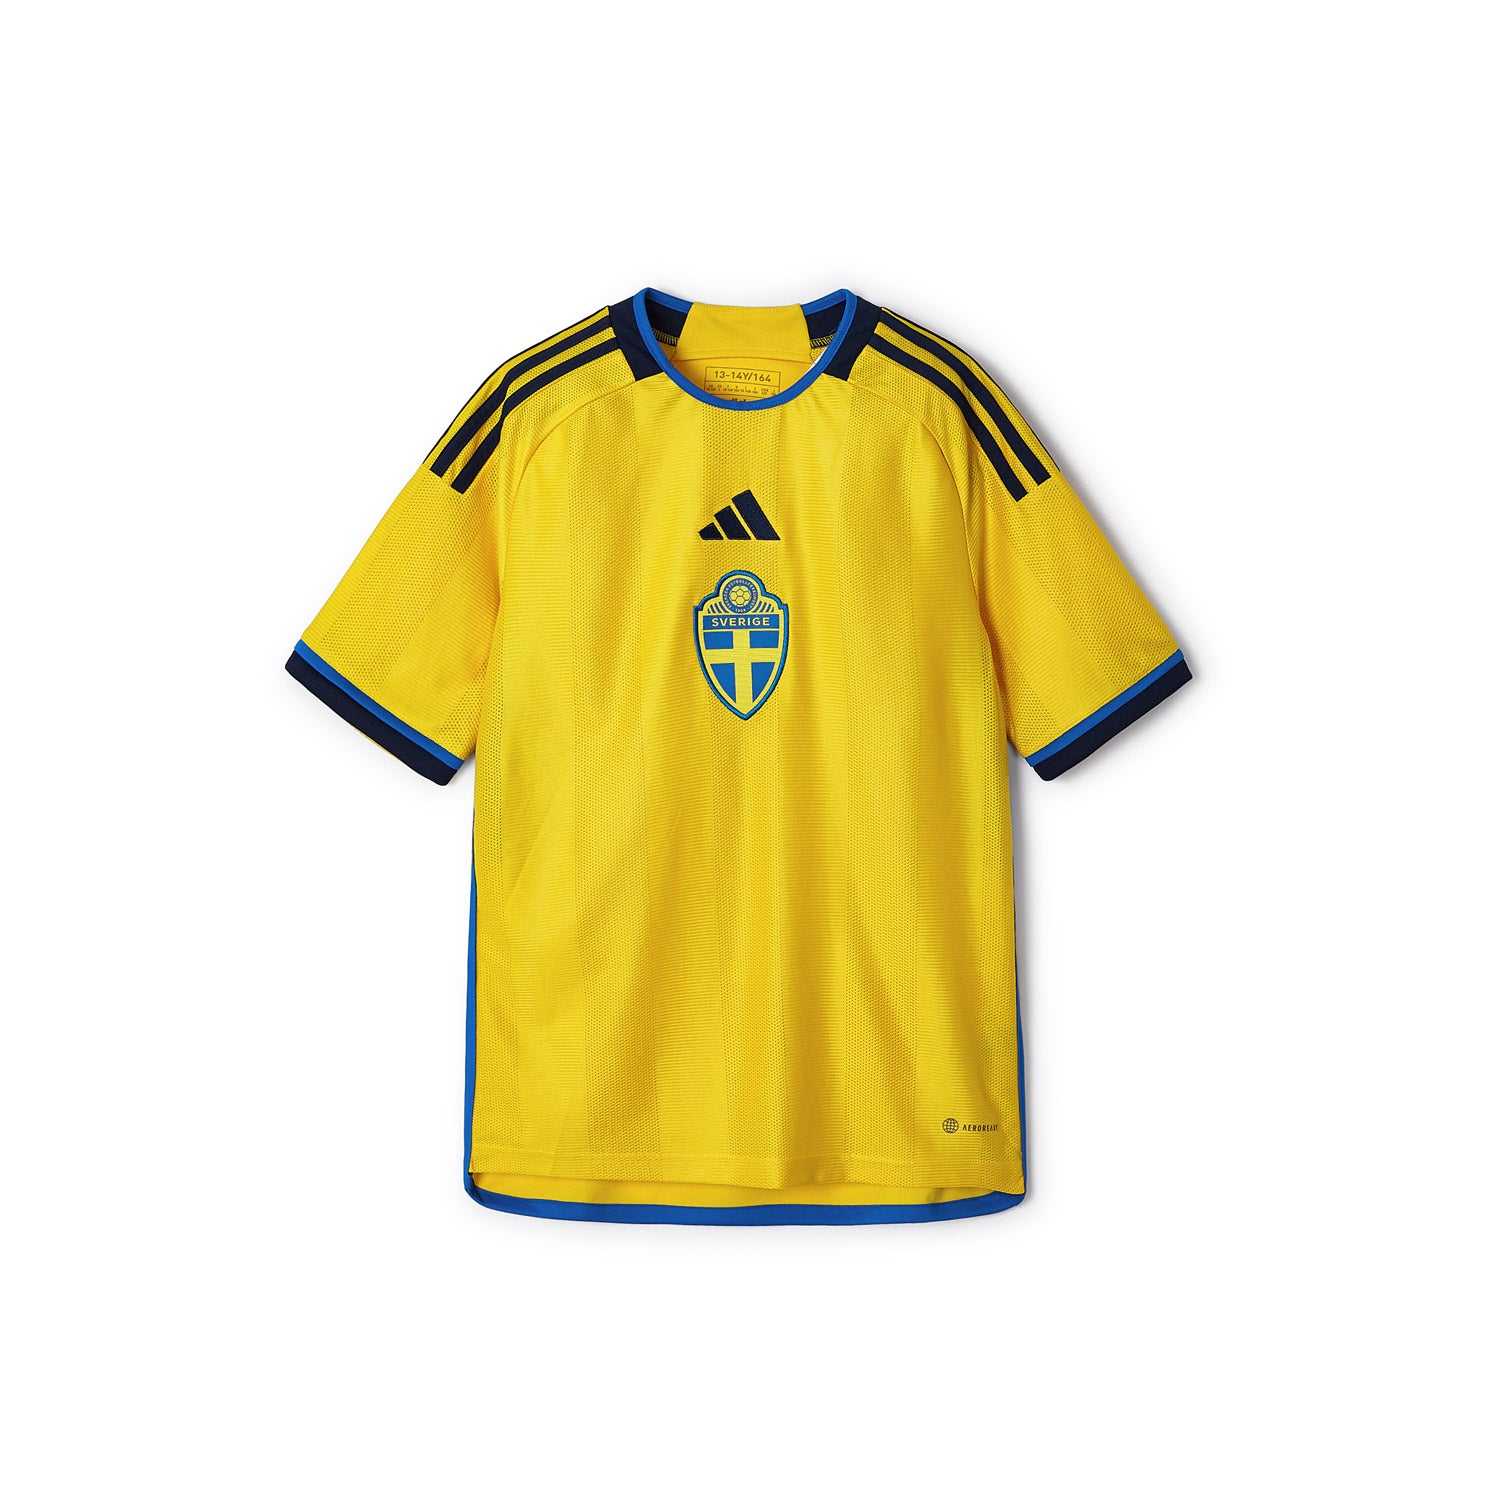 Sweden 22 Home Jersey - Youth